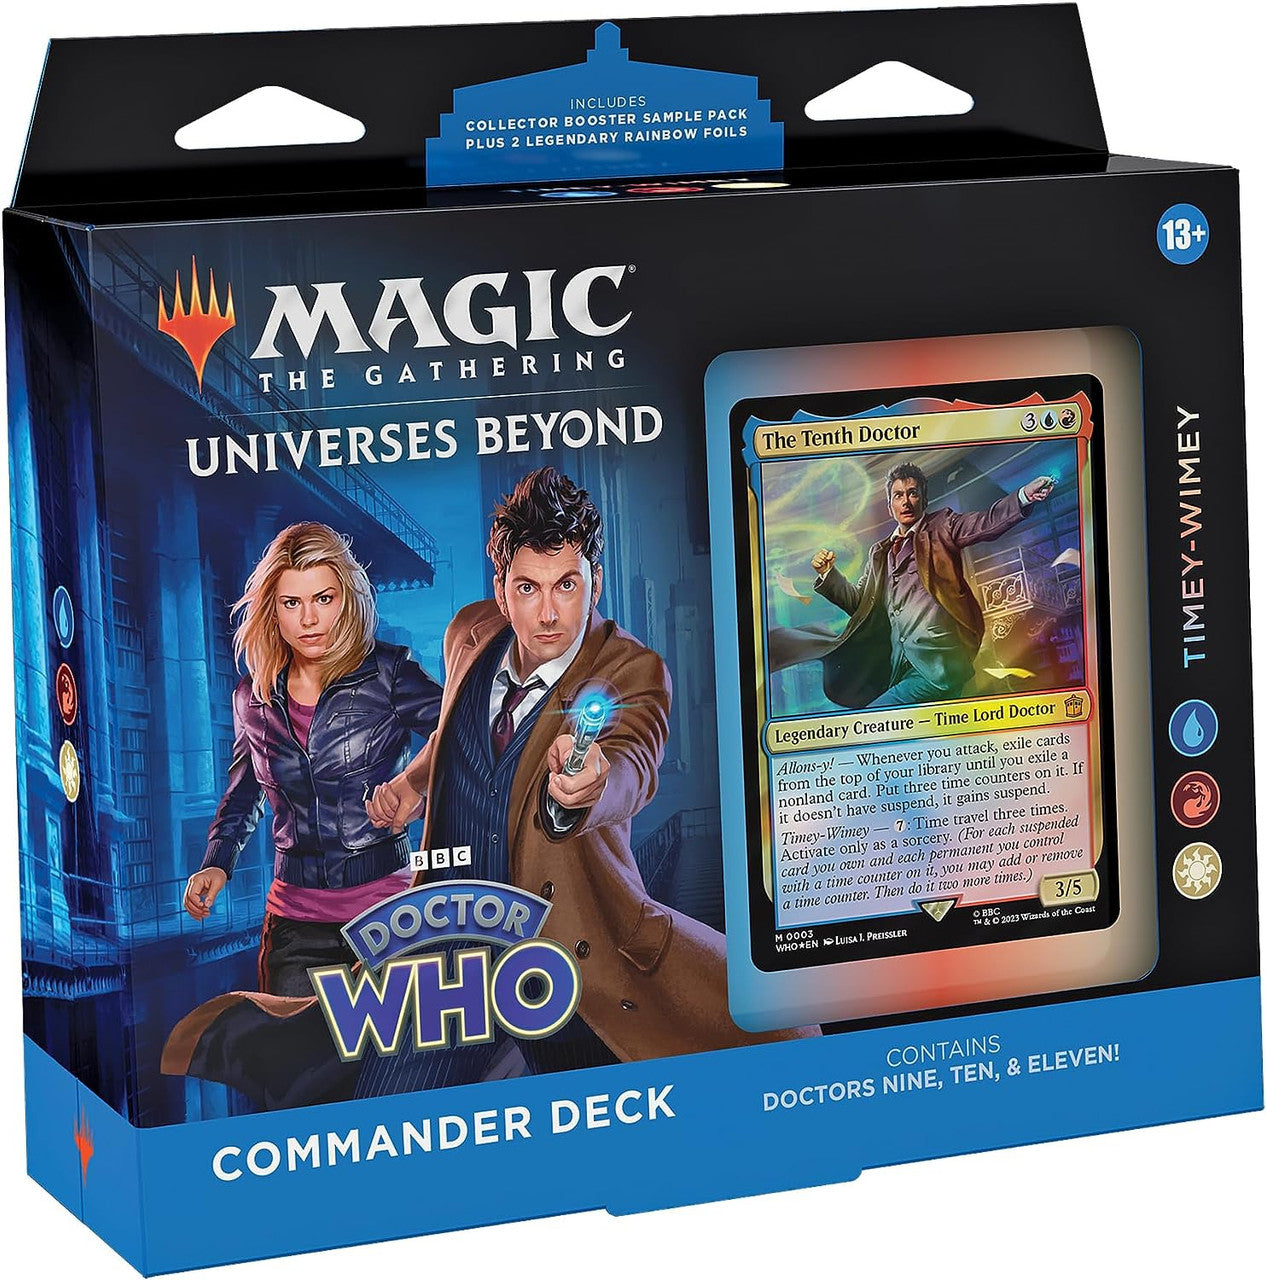 Doctor Who: Timey Wimey Commander Deck